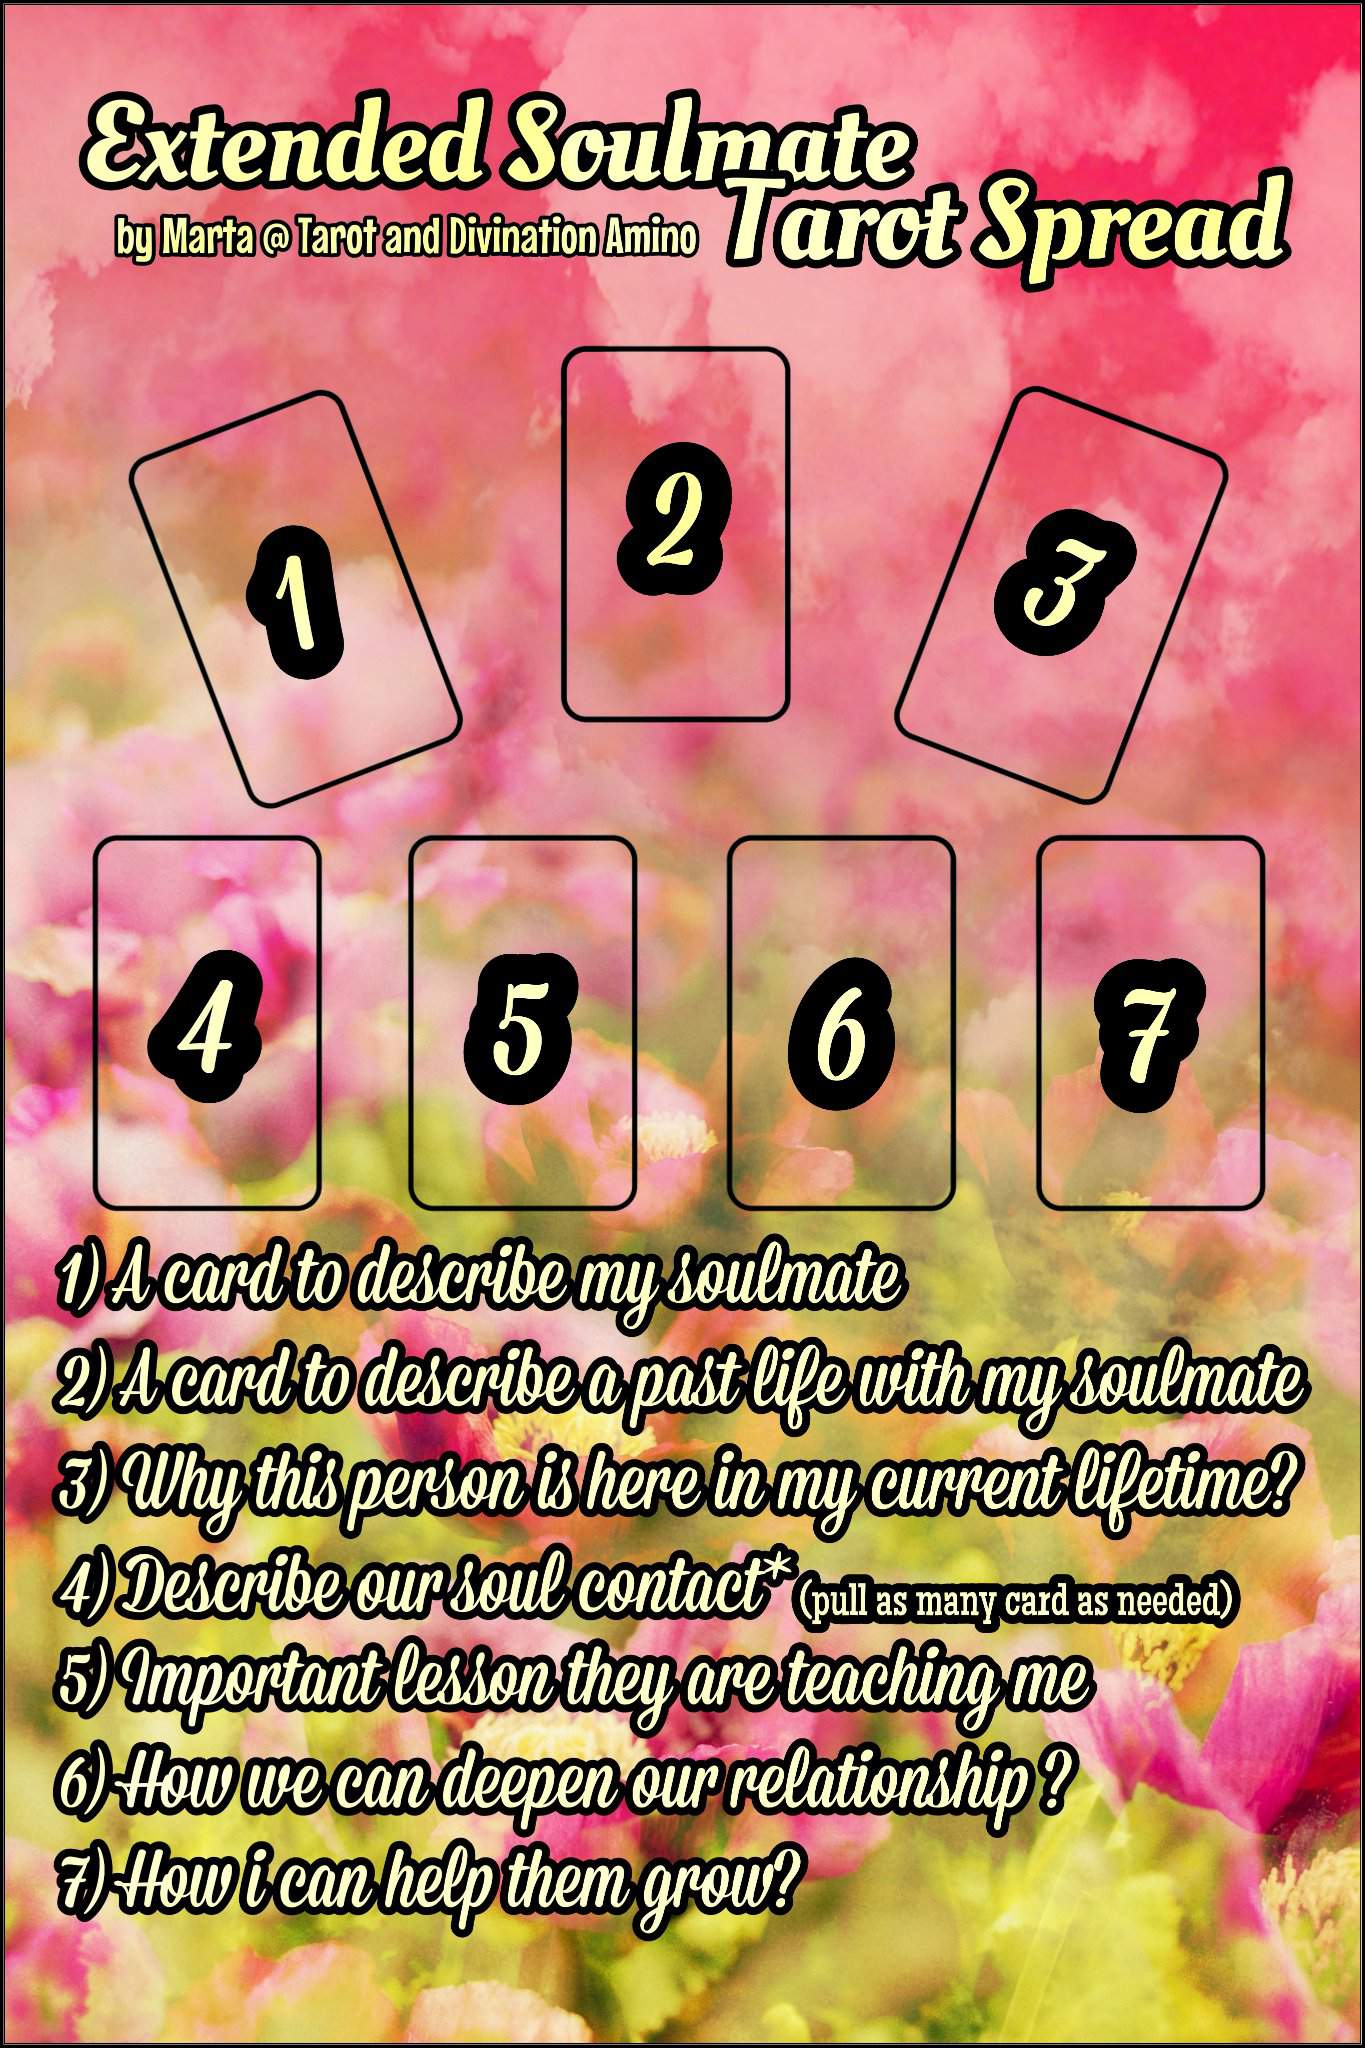 Extended Soulmate Tarot Spread Wiki Tarot And Divination Amino